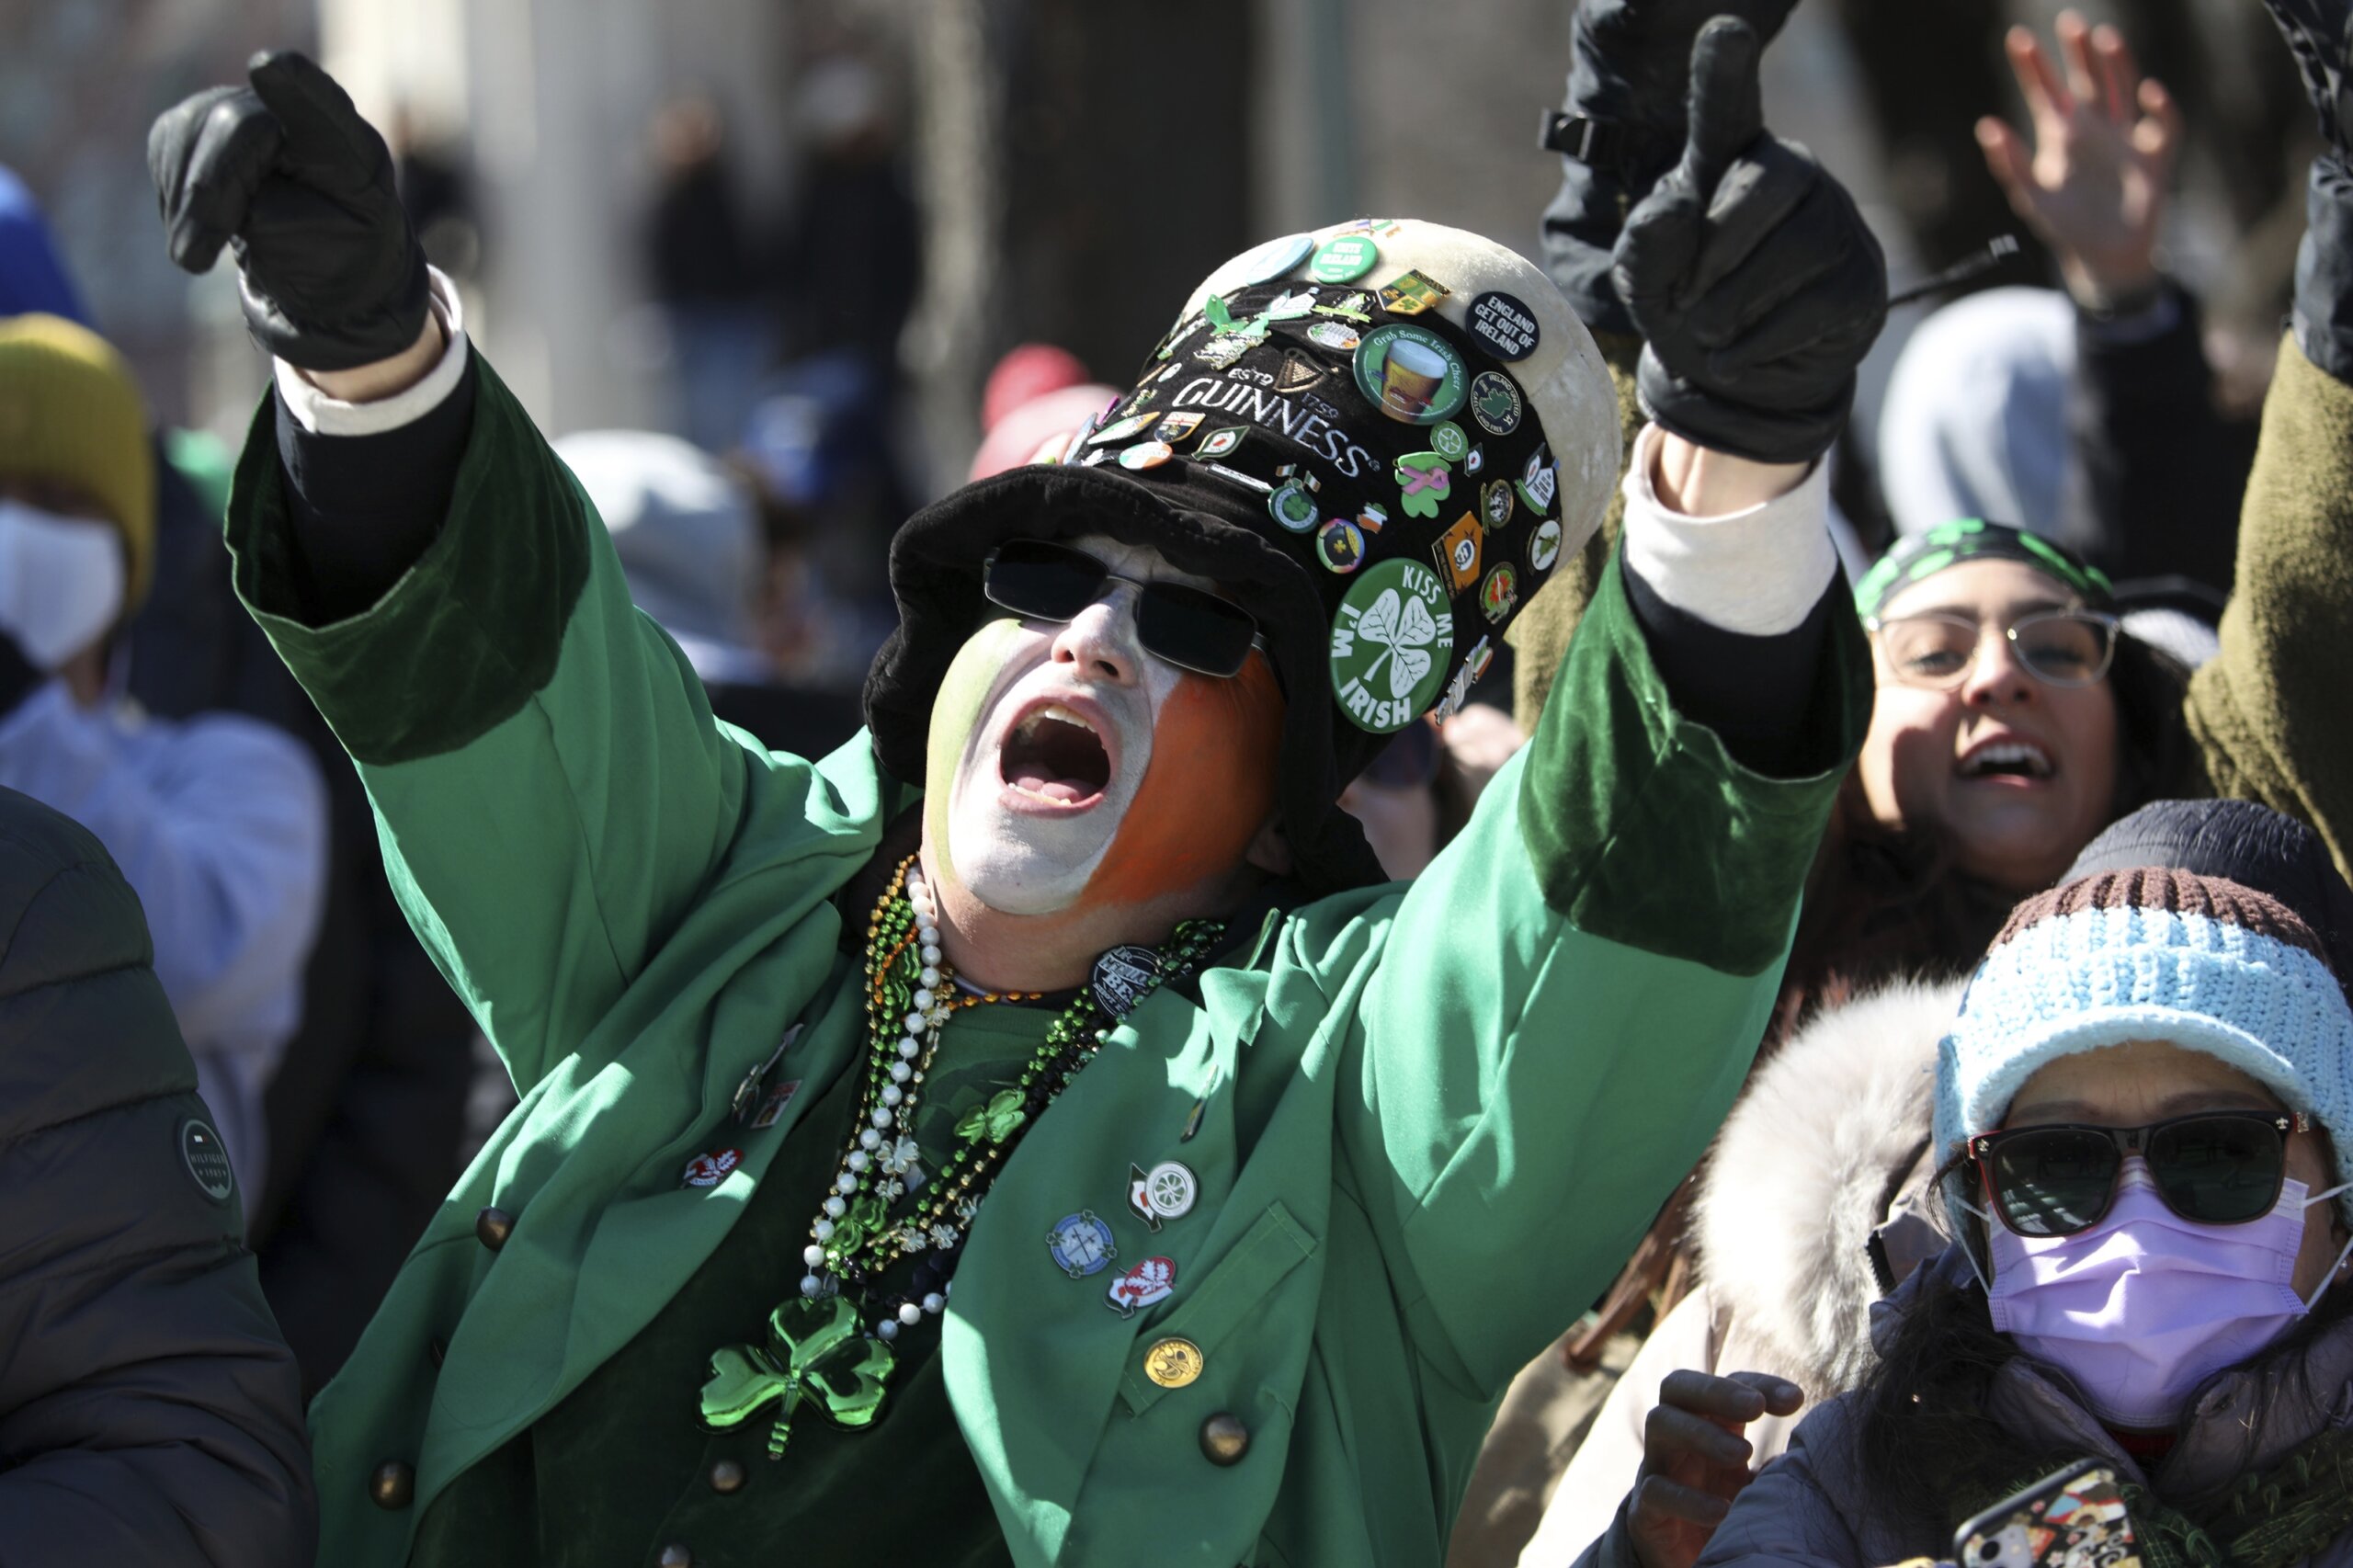 NYC St. Patrick's Day Parade: Street Closures, Security and More